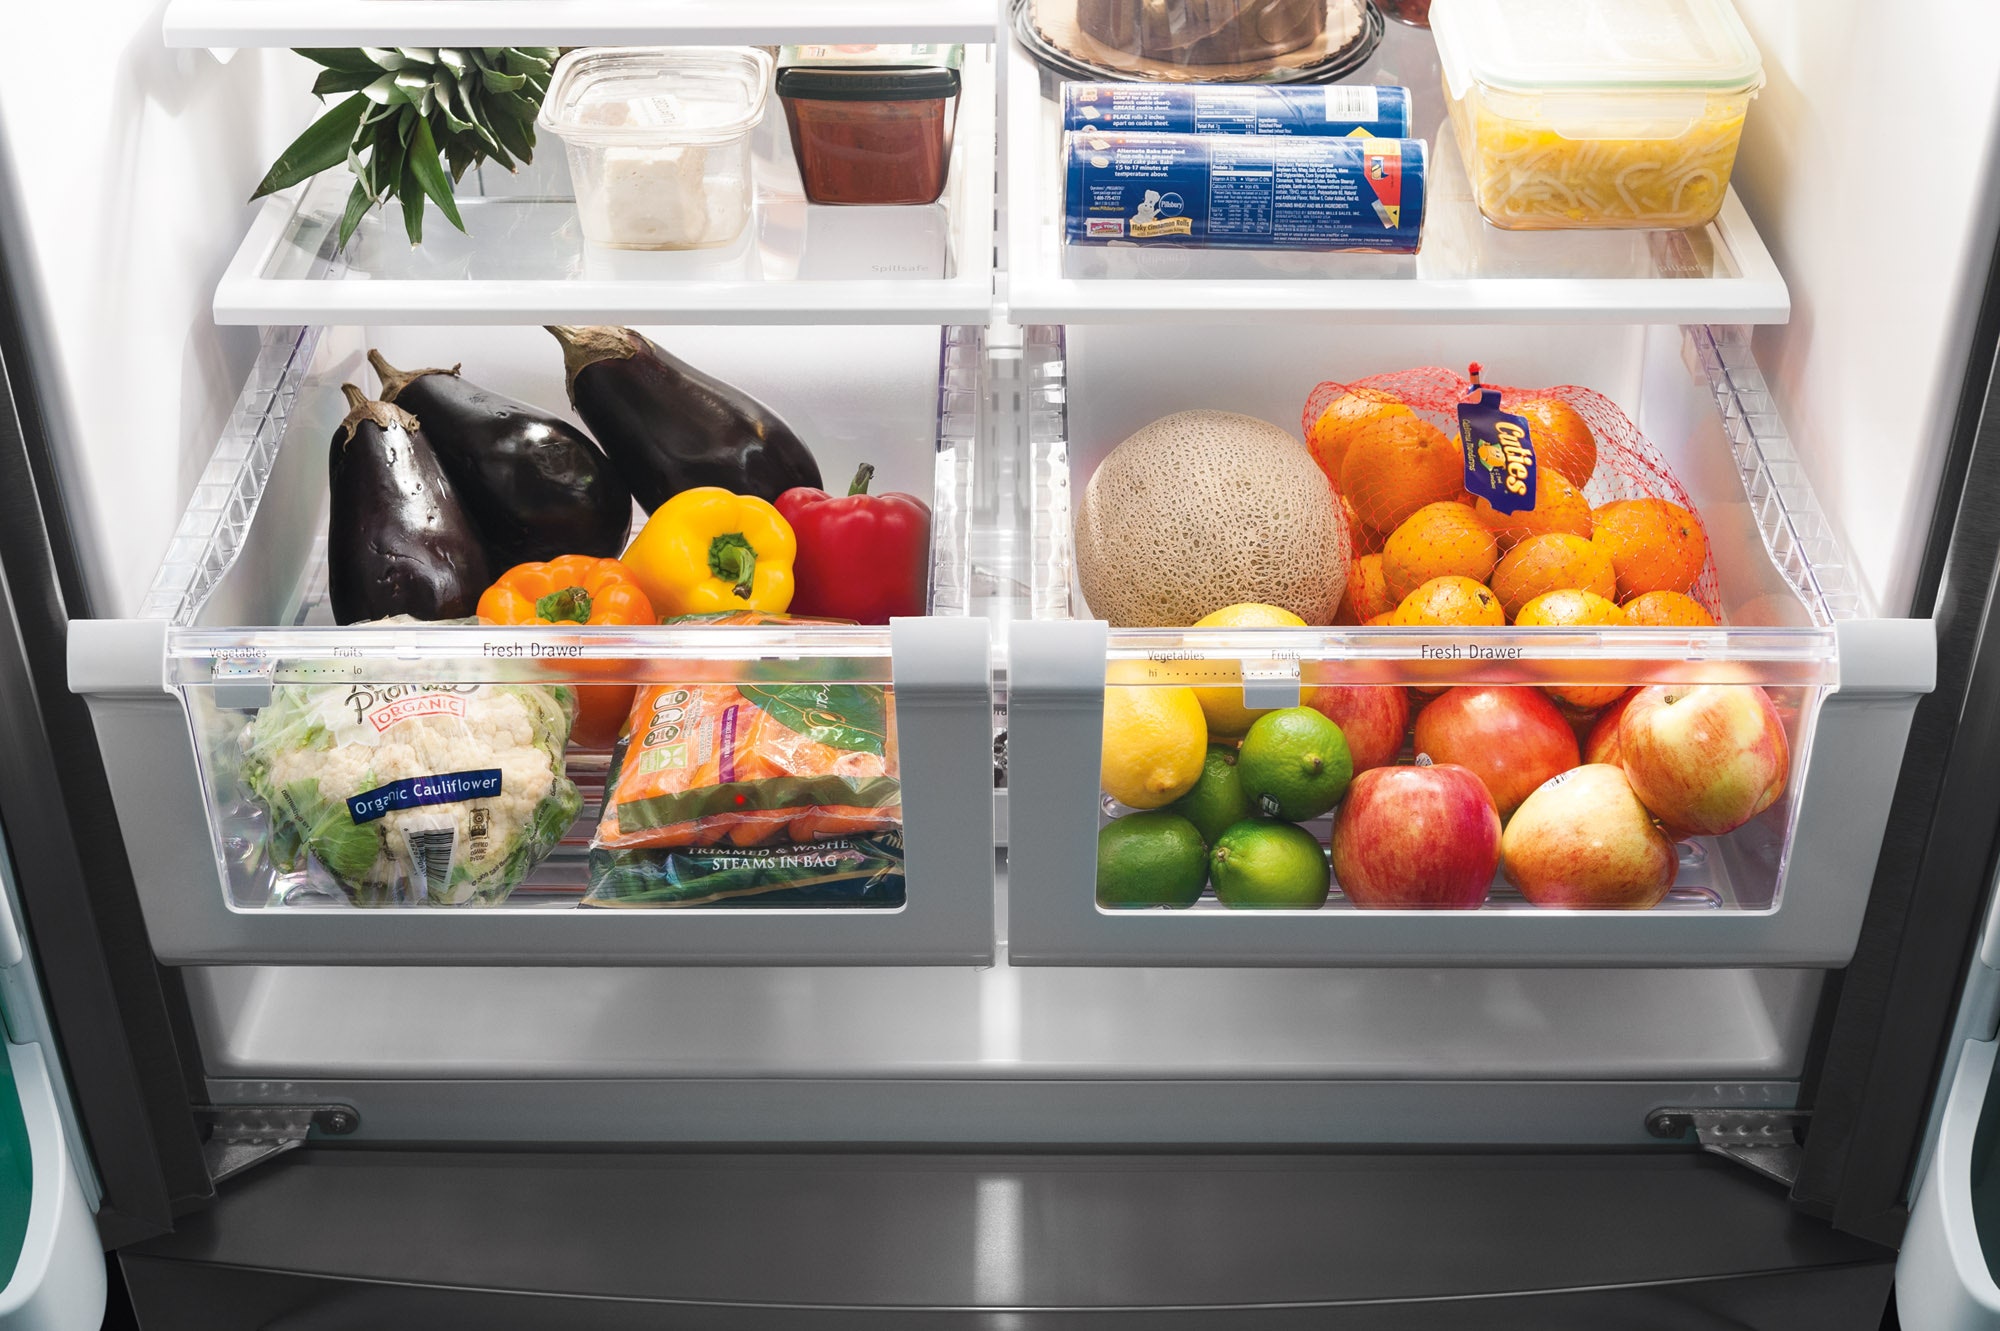 what are the different compartments in my fridge used for and what does the crisper do